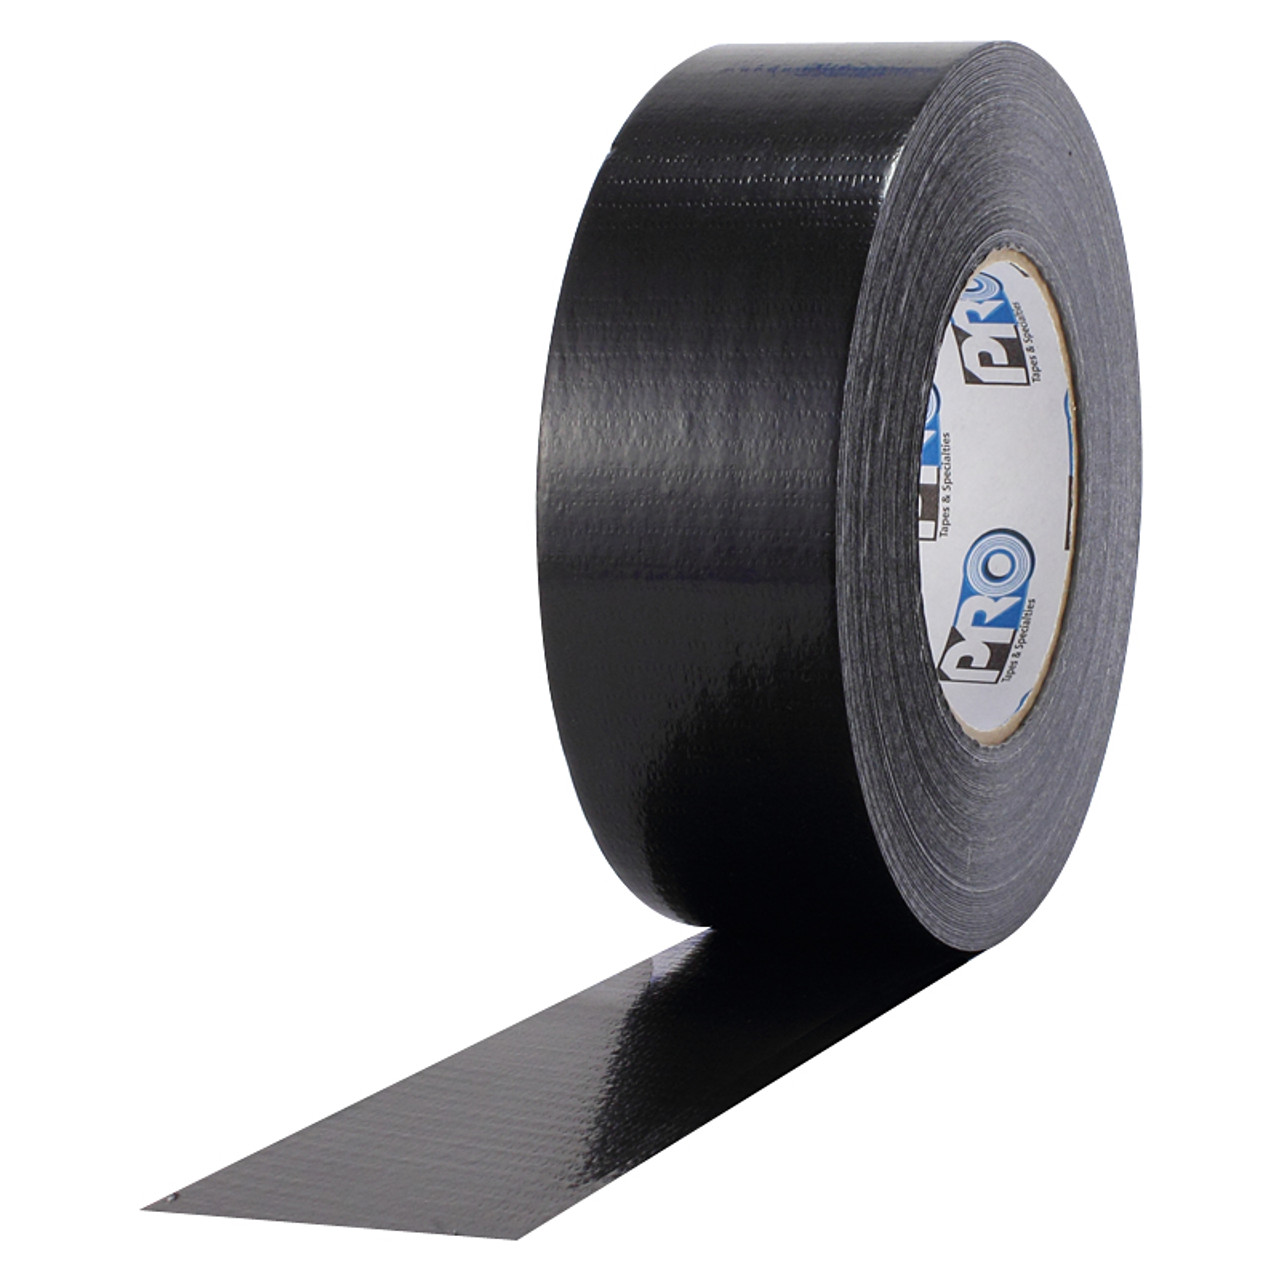 DUCT TAPE 2''  Buy online from Damas Express